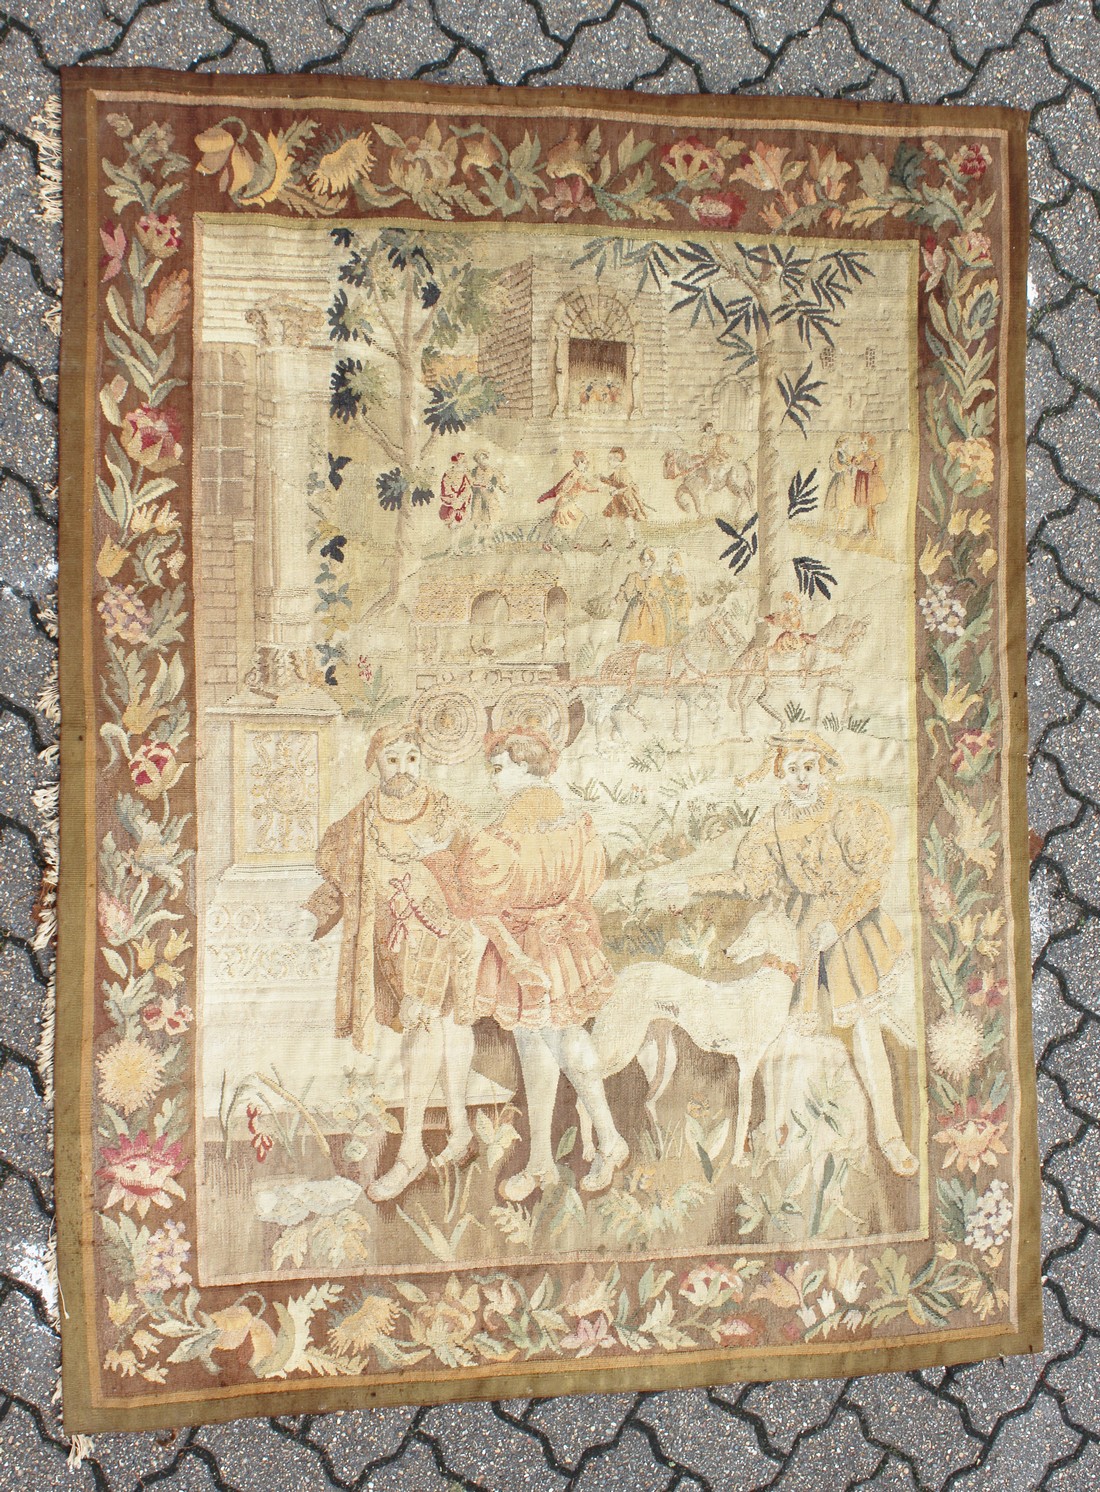 A GOOD 18TH CENTURY FRENCH TAPESTRY decorated with many figures within a floral border. 6ft high x - Image 2 of 9